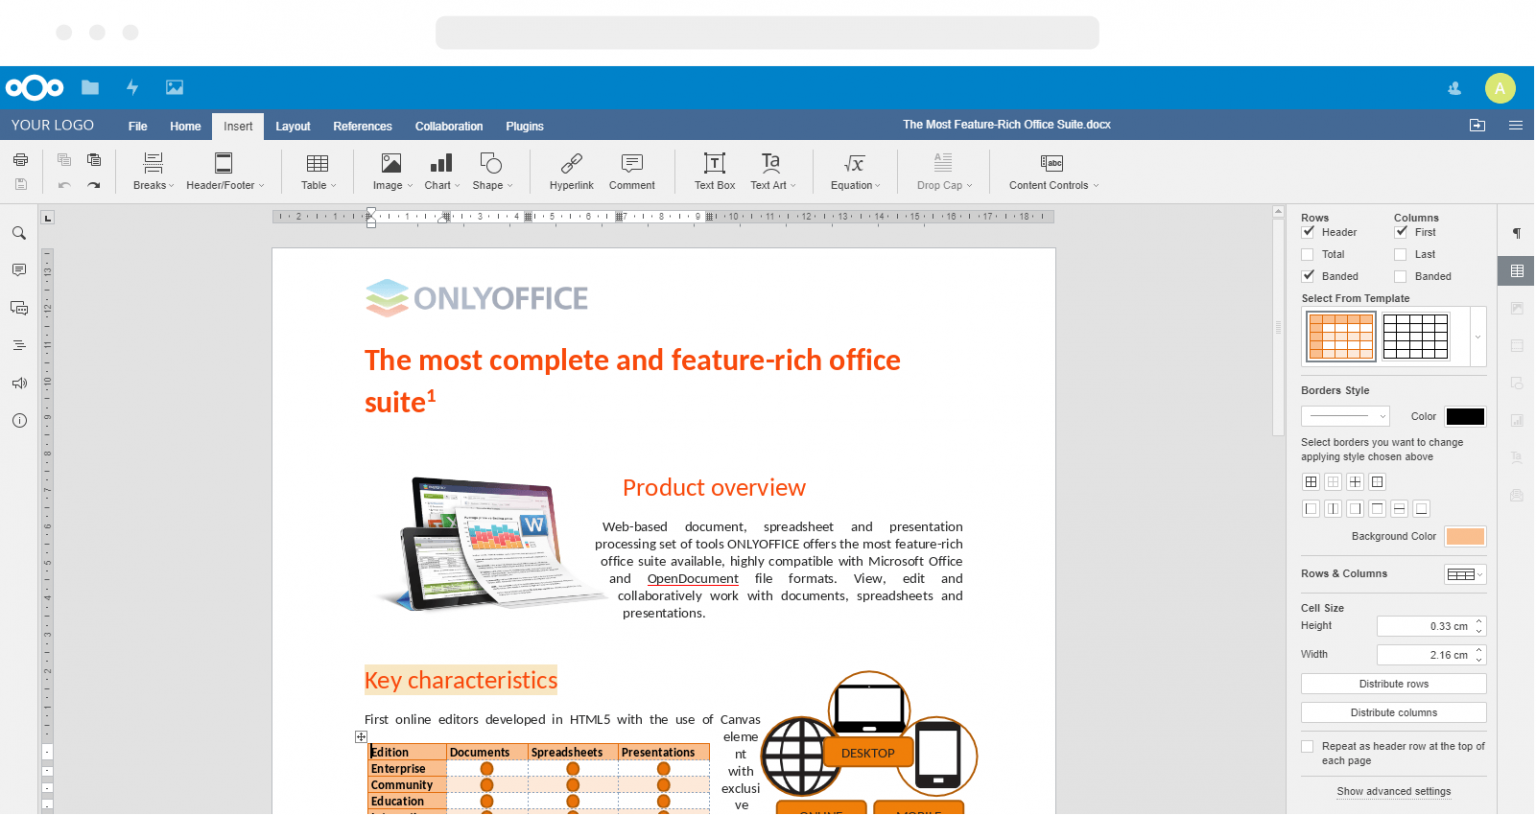 ONLYOFFICE 7.4.1.36 instal the last version for windows